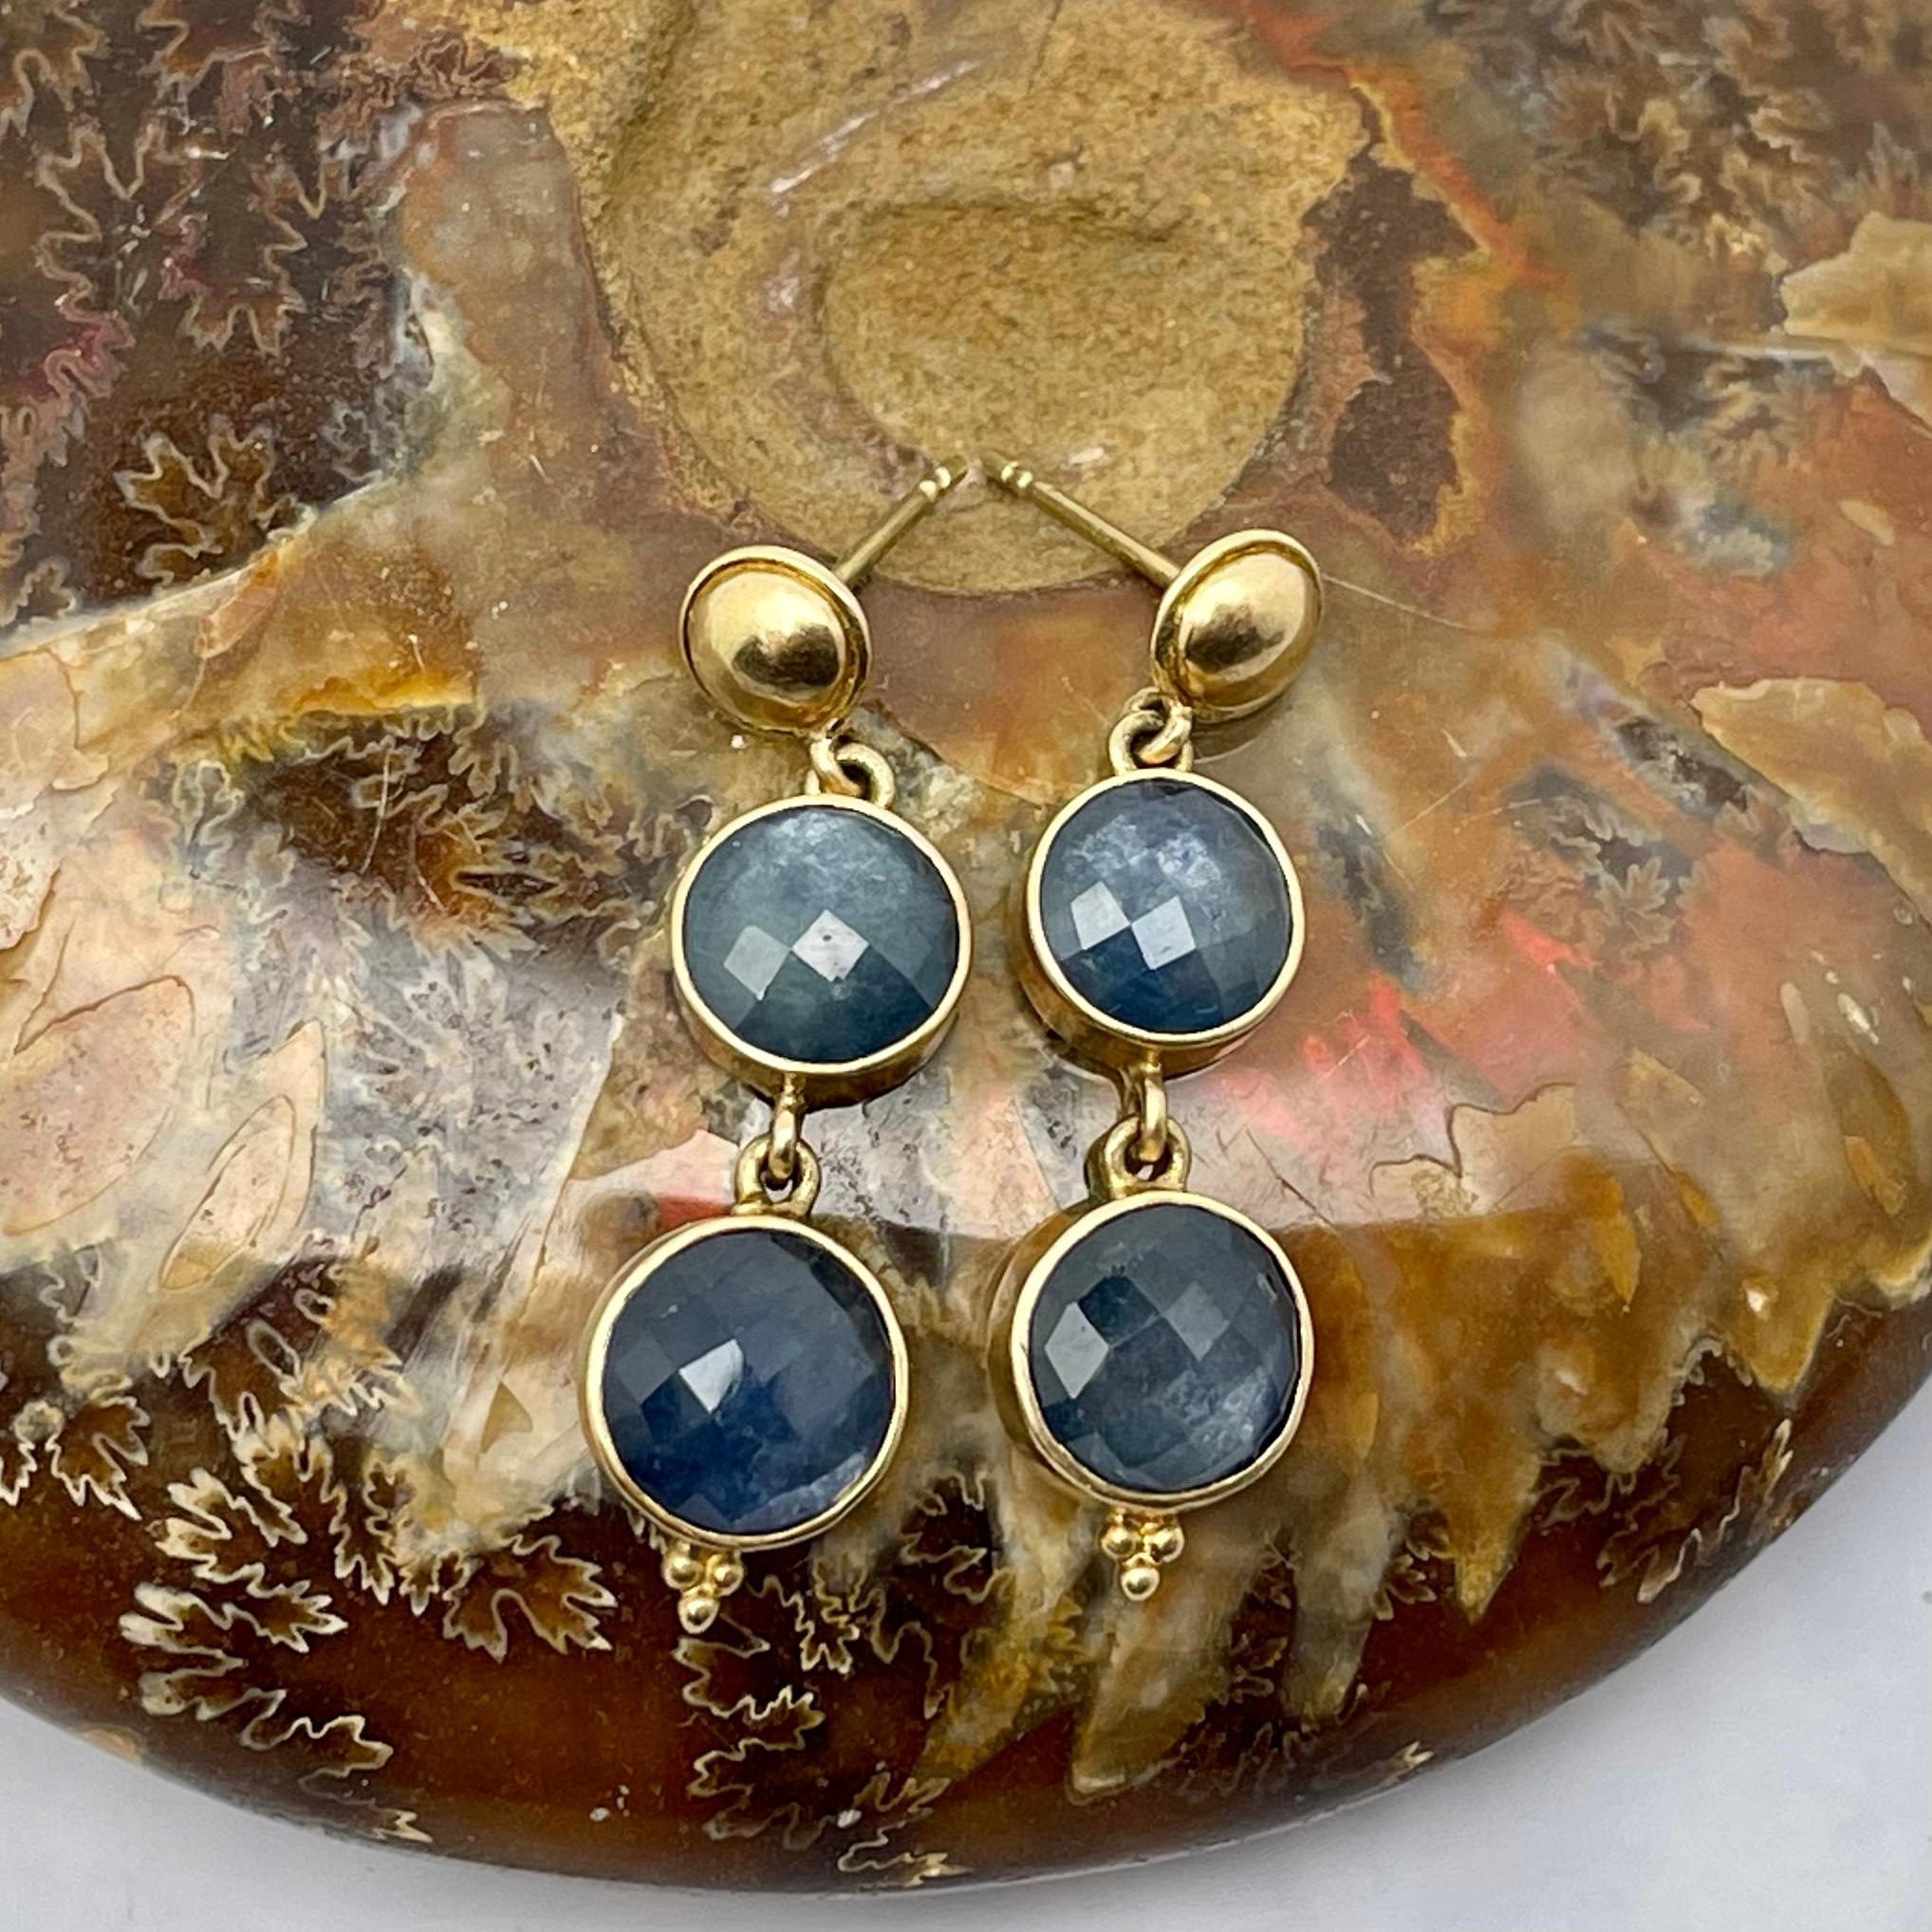 Steven Battelle 7.6 Carats Blue Sapphire 18K Gold Earrings In New Condition For Sale In Soquel, CA